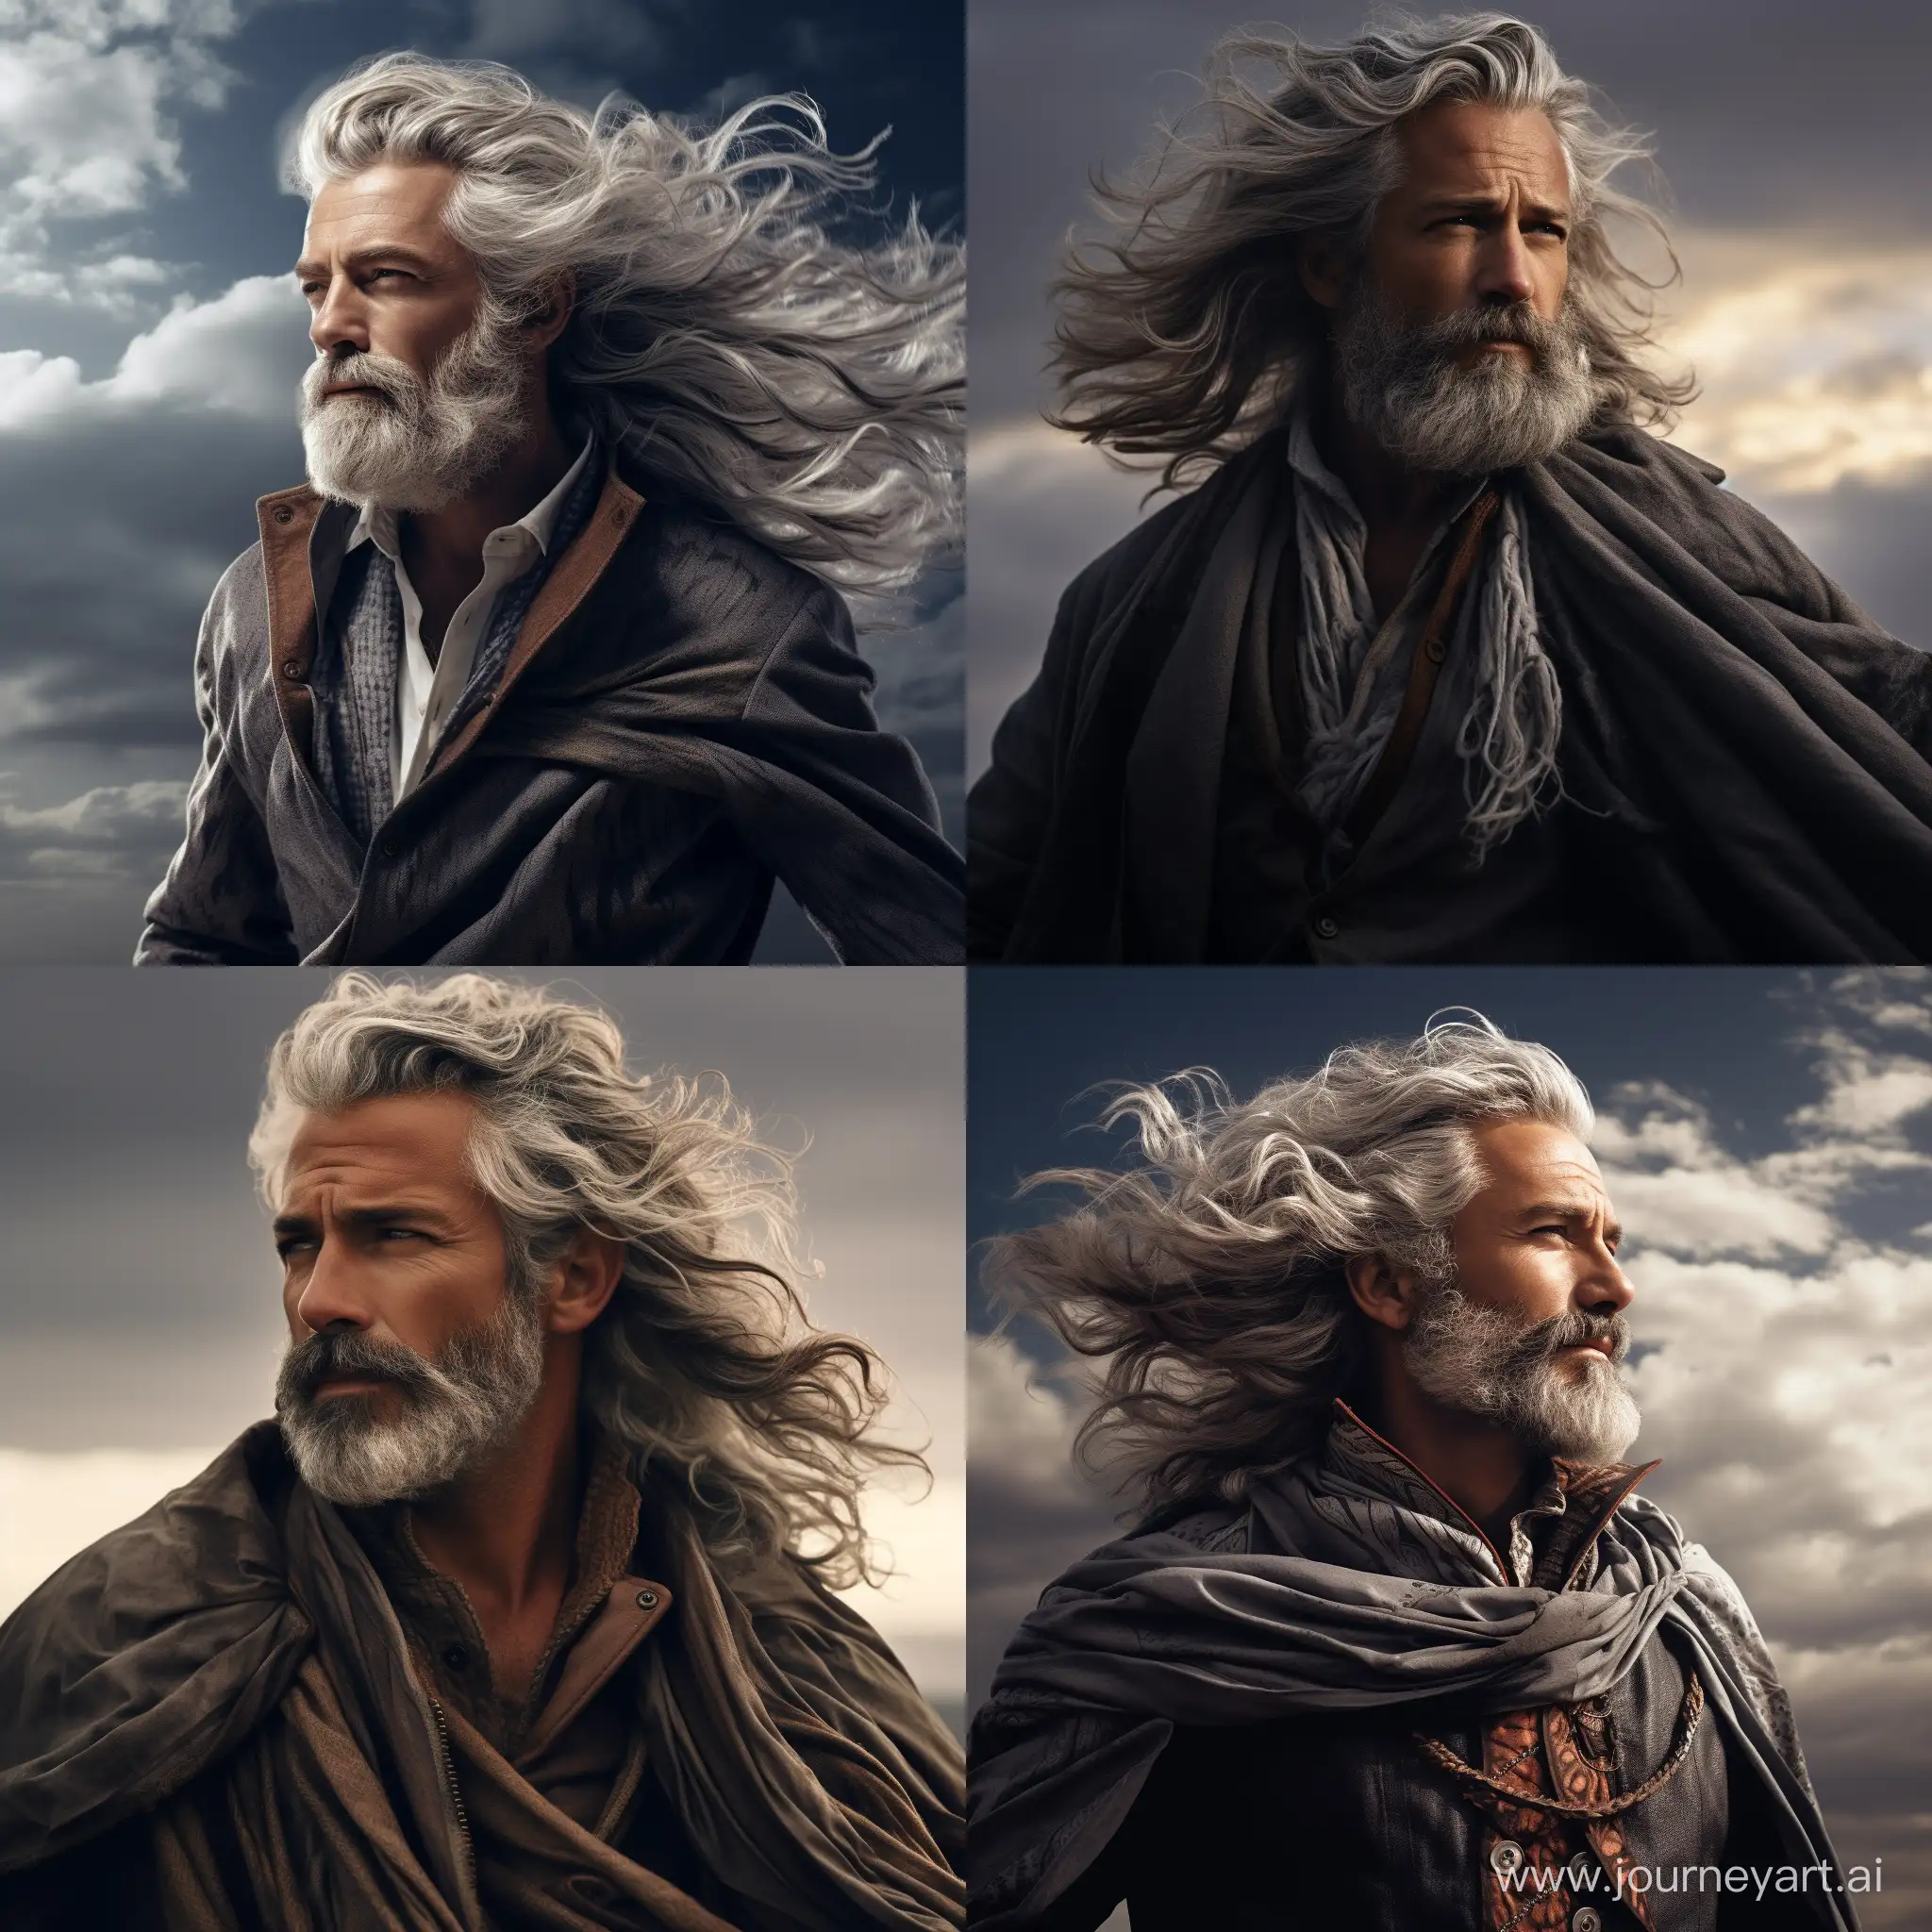 Majestic-GrayHaired-Man-Embracing-the-Wind-in-11-Ratio